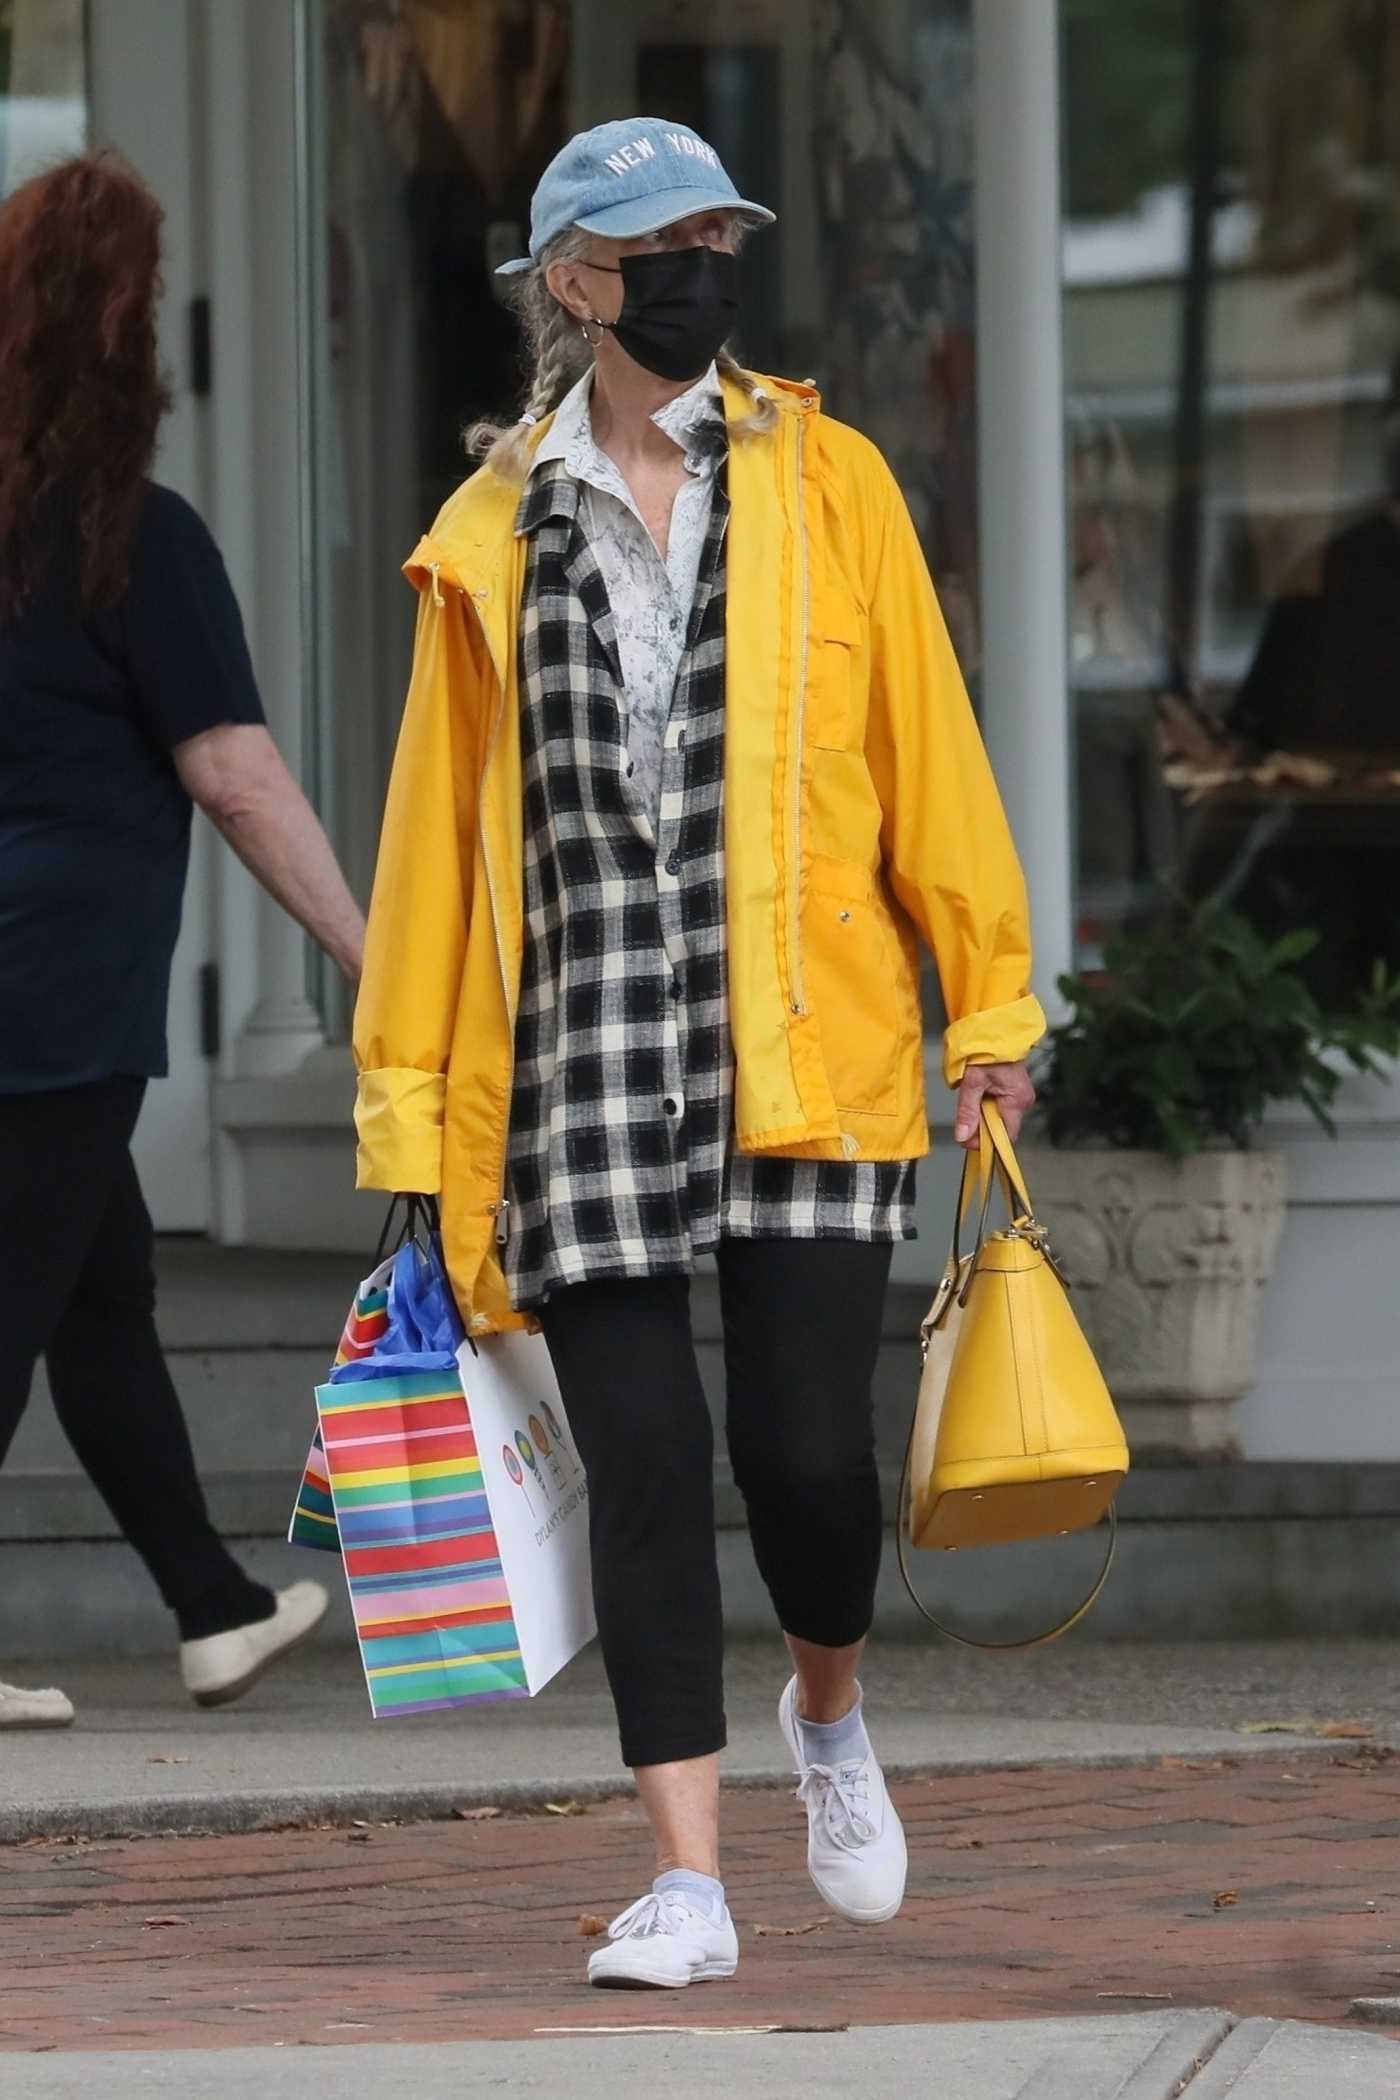 Blythe Danner in a Yellow Windbreaker Goes Shopping in the Hamptons, NYC 09/09/2020